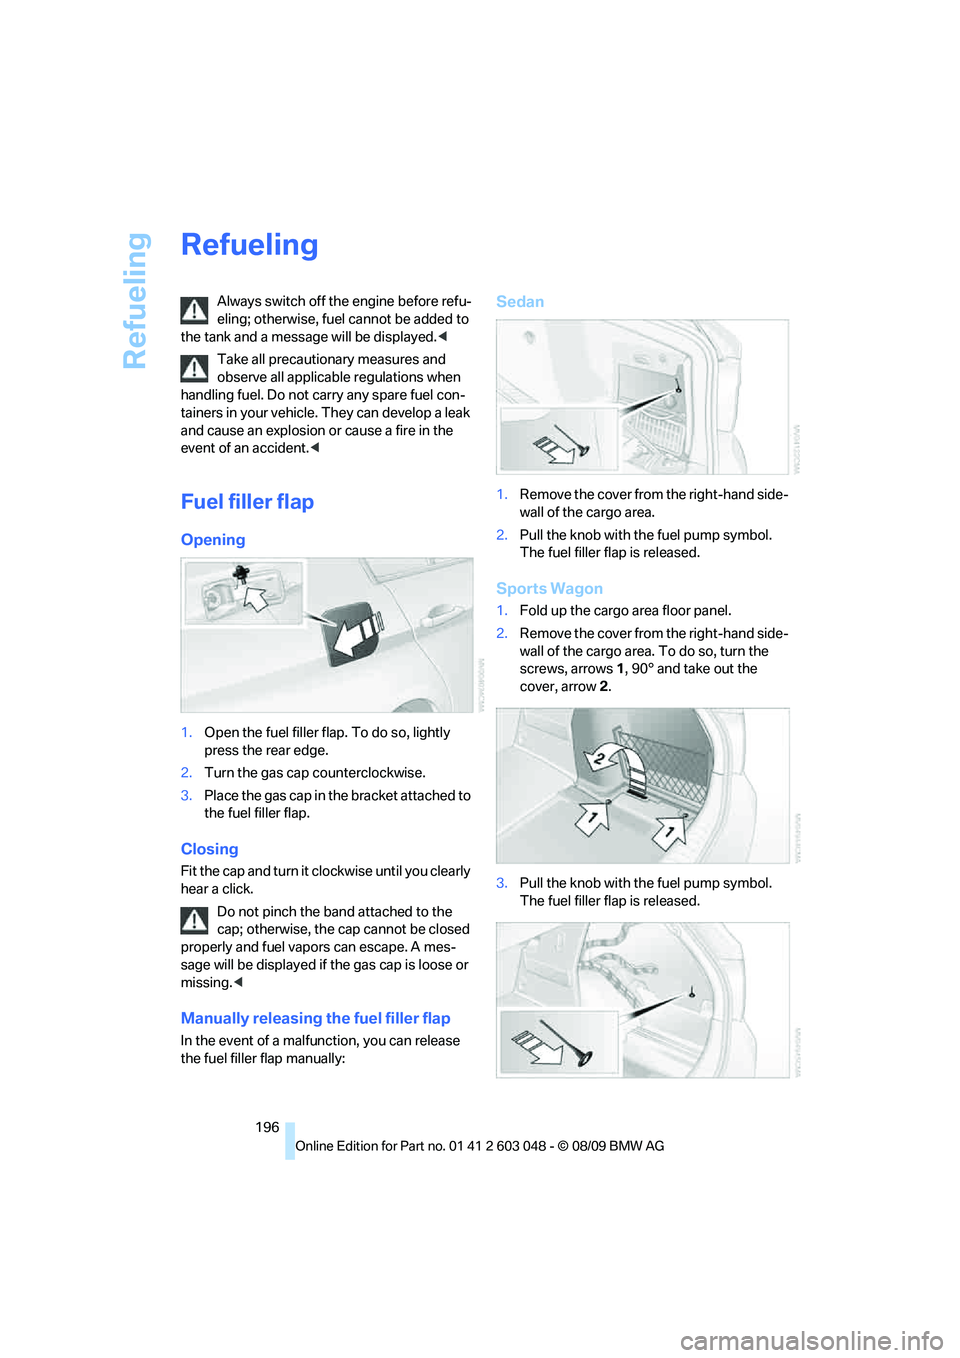 BMW 330D 2010  Owners Manual Refueling
196
Refueling
Always switch off the engine before refu-
eling; otherwise, fuel cannot be added to 
the tank and a message will be displayed.<
Take all precautionary measures and 
observe all